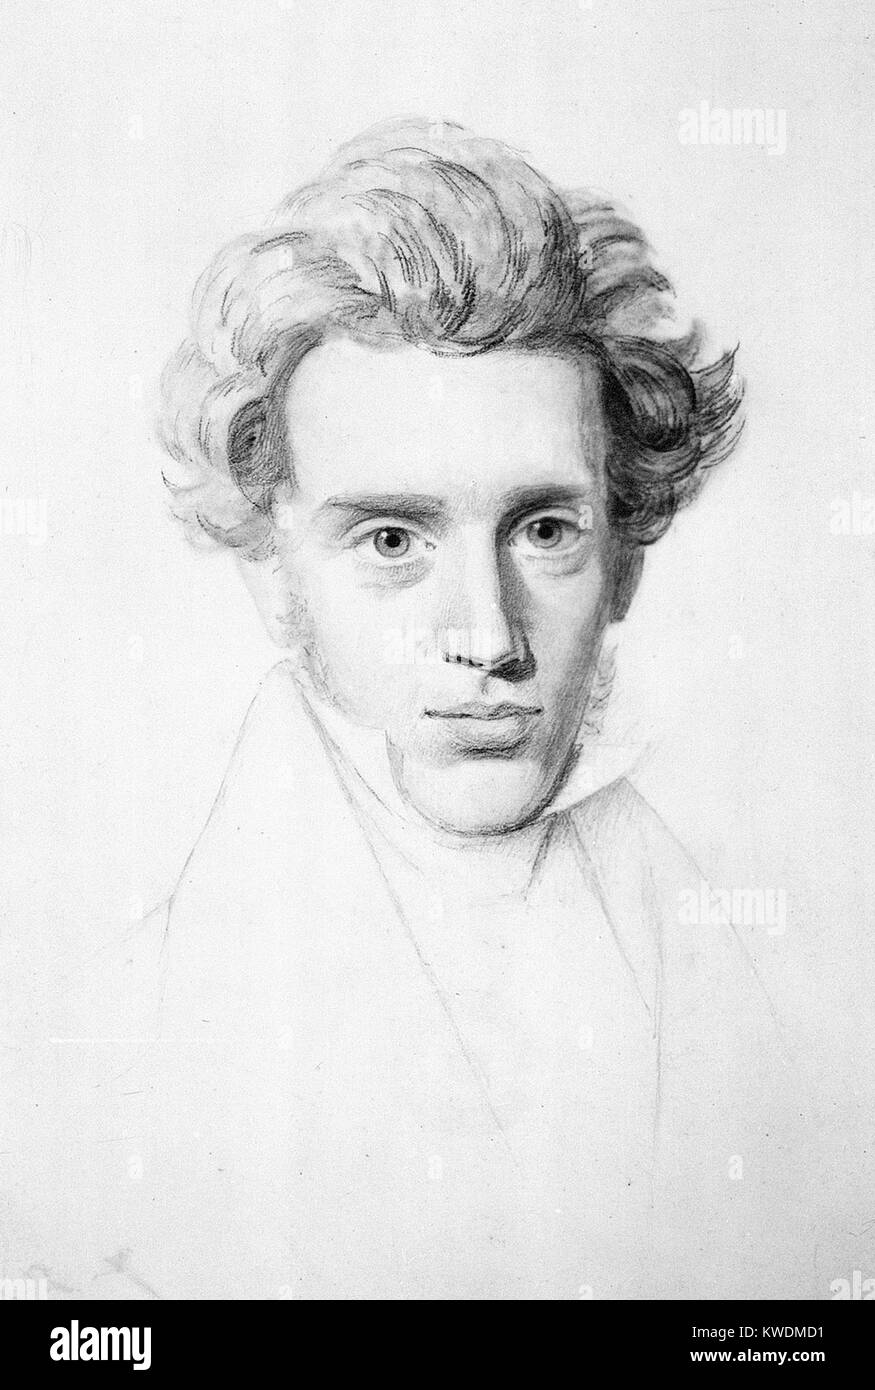 Søren Kierkegaard; drawing by Niels Christian Kierkegaard, circa 1840 a Danish philosopher, theologian, poet, social critic and religious author who is widely considered to be the first existentialist philosopher Stock Photo